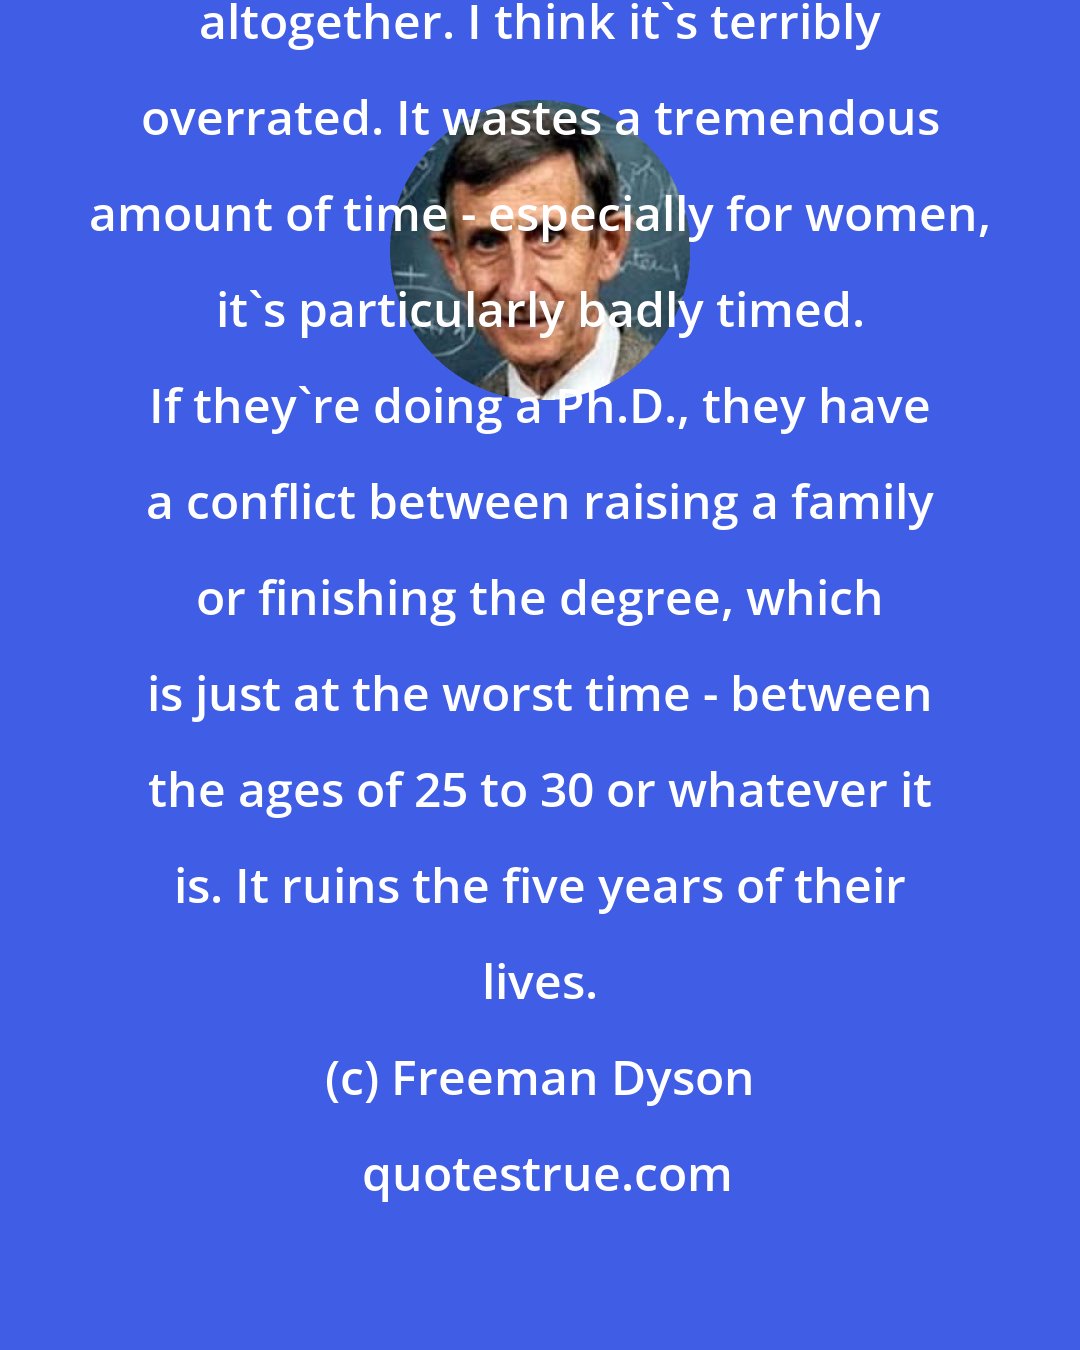 Freeman Dyson: I'm prejudiced about education altogether. I think it's terribly overrated. It wastes a tremendous amount of time - especially for women, it's particularly badly timed. If they're doing a Ph.D., they have a conflict between raising a family or finishing the degree, which is just at the worst time - between the ages of 25 to 30 or whatever it is. It ruins the five years of their lives.